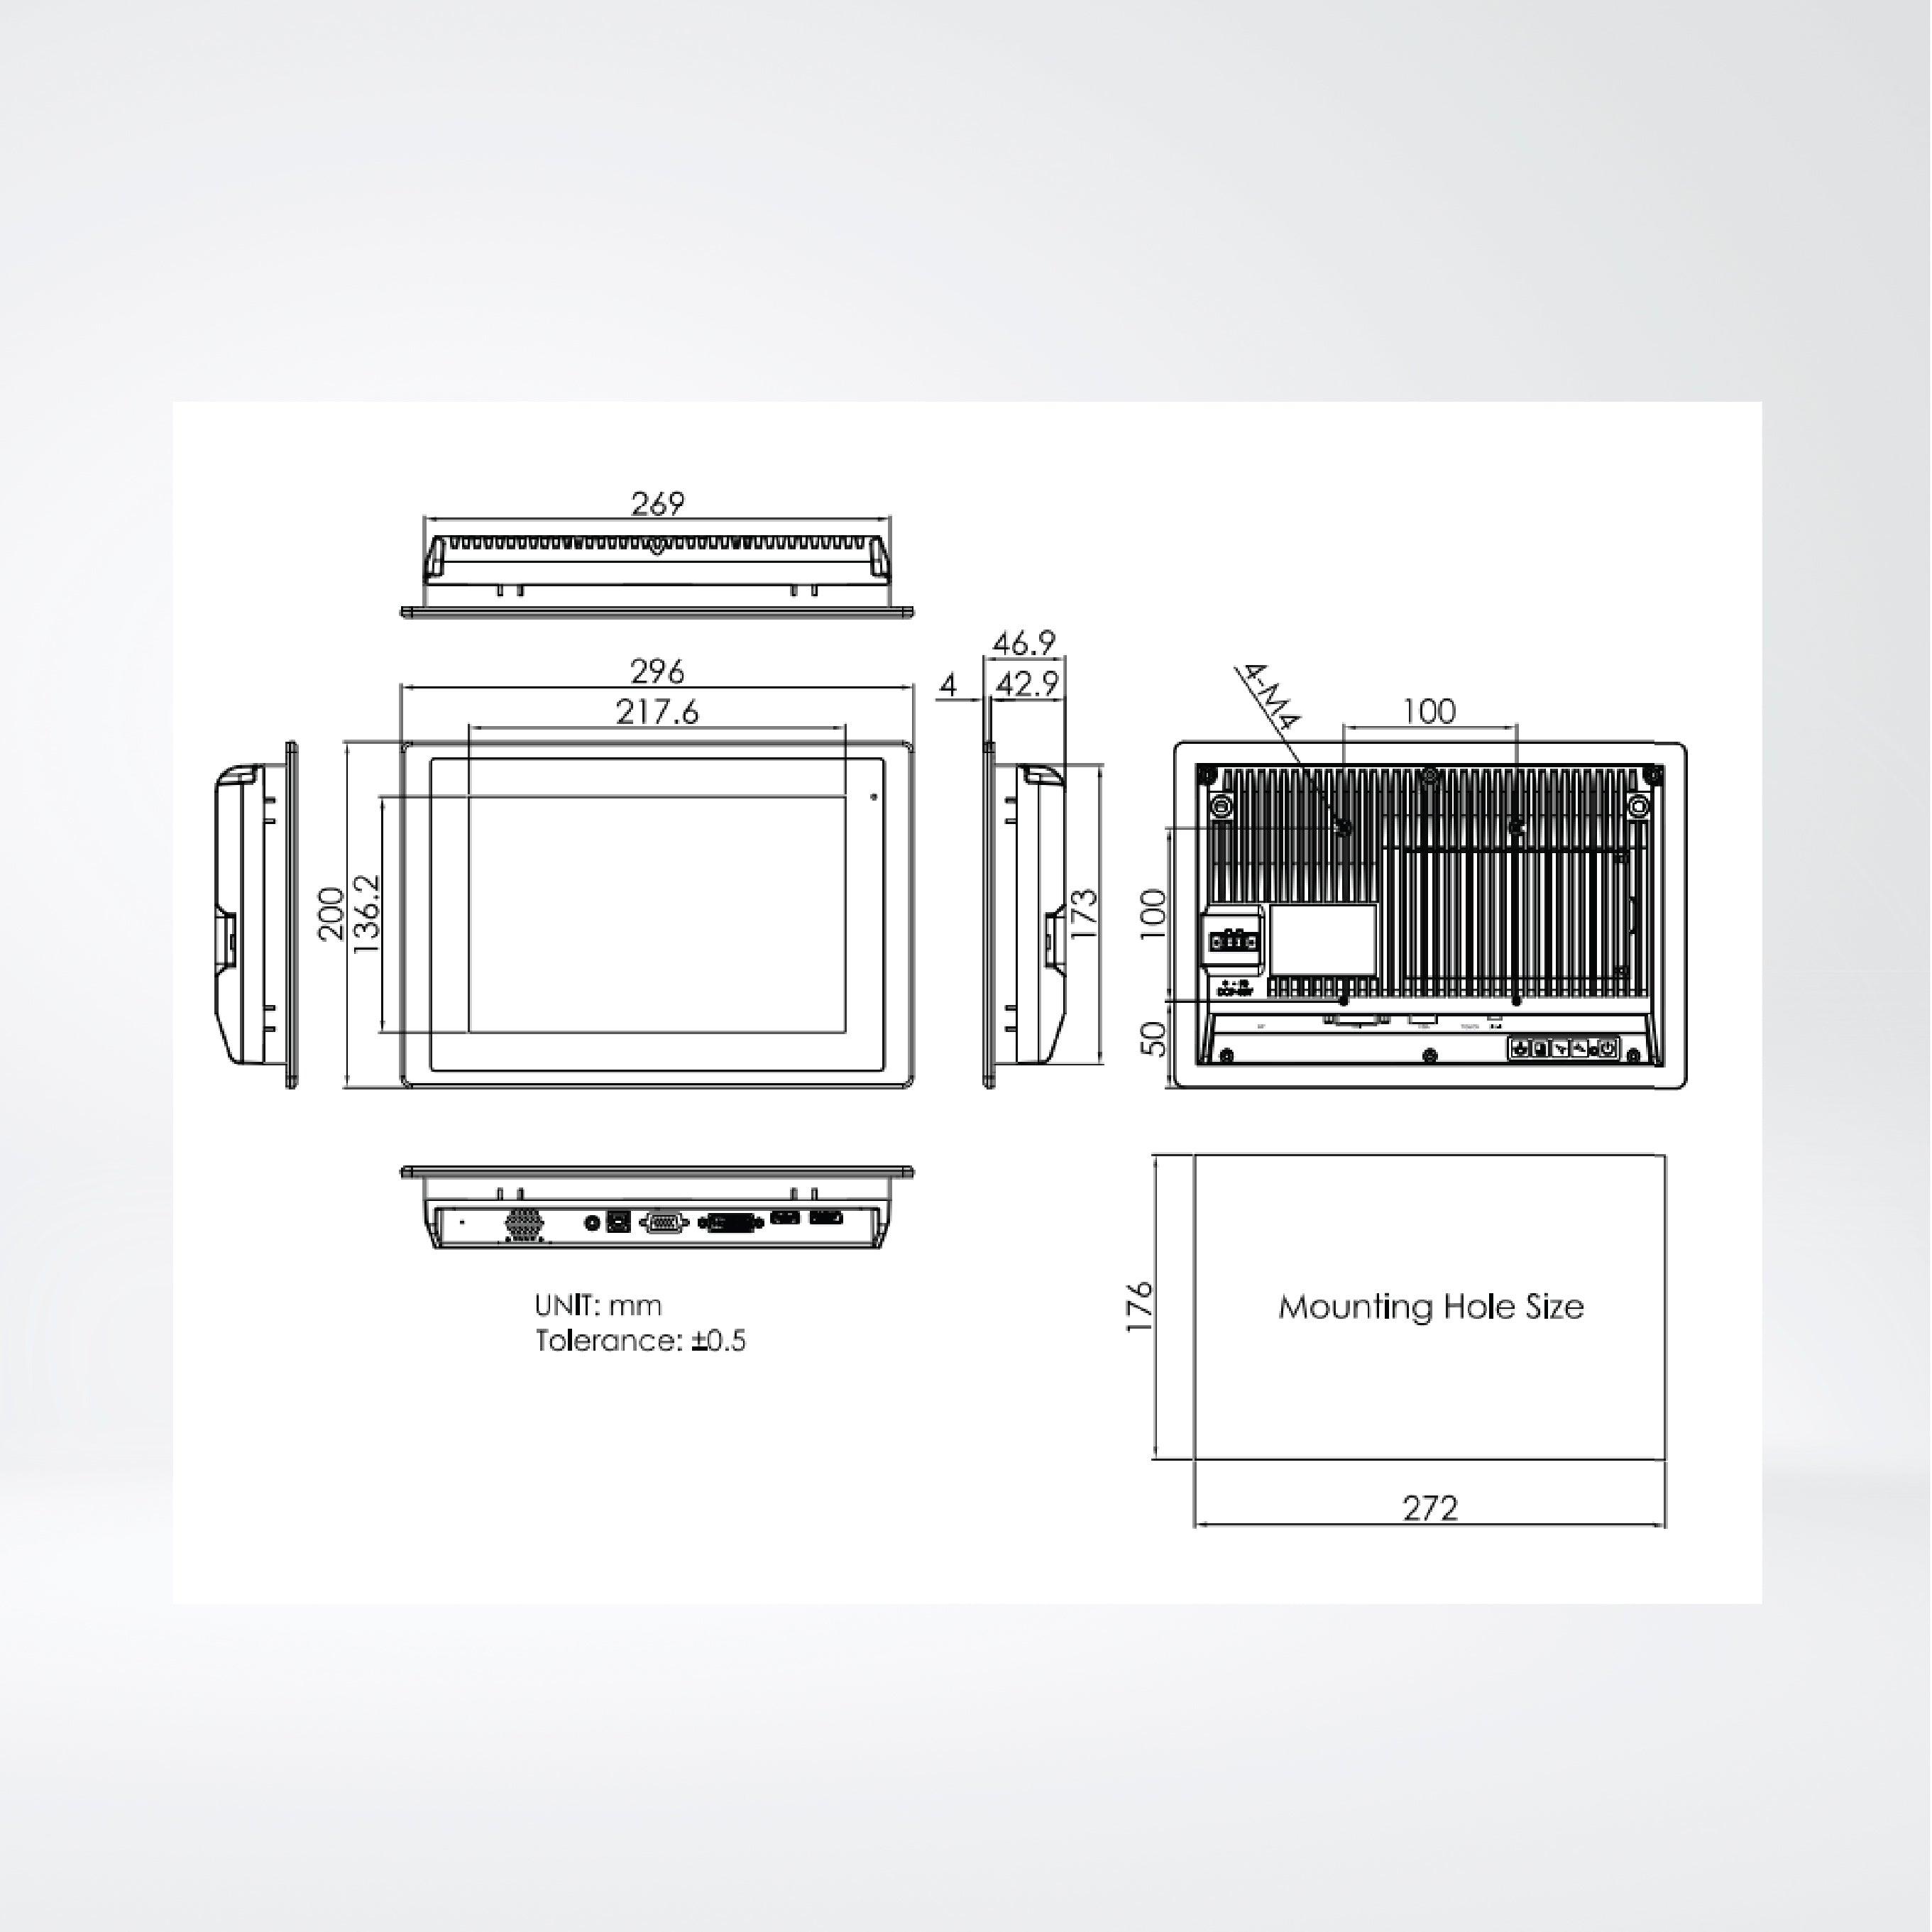 FABS-110PH 10.1” Flat Front Panel IP66 Stainless Chassis Display - Riverplus